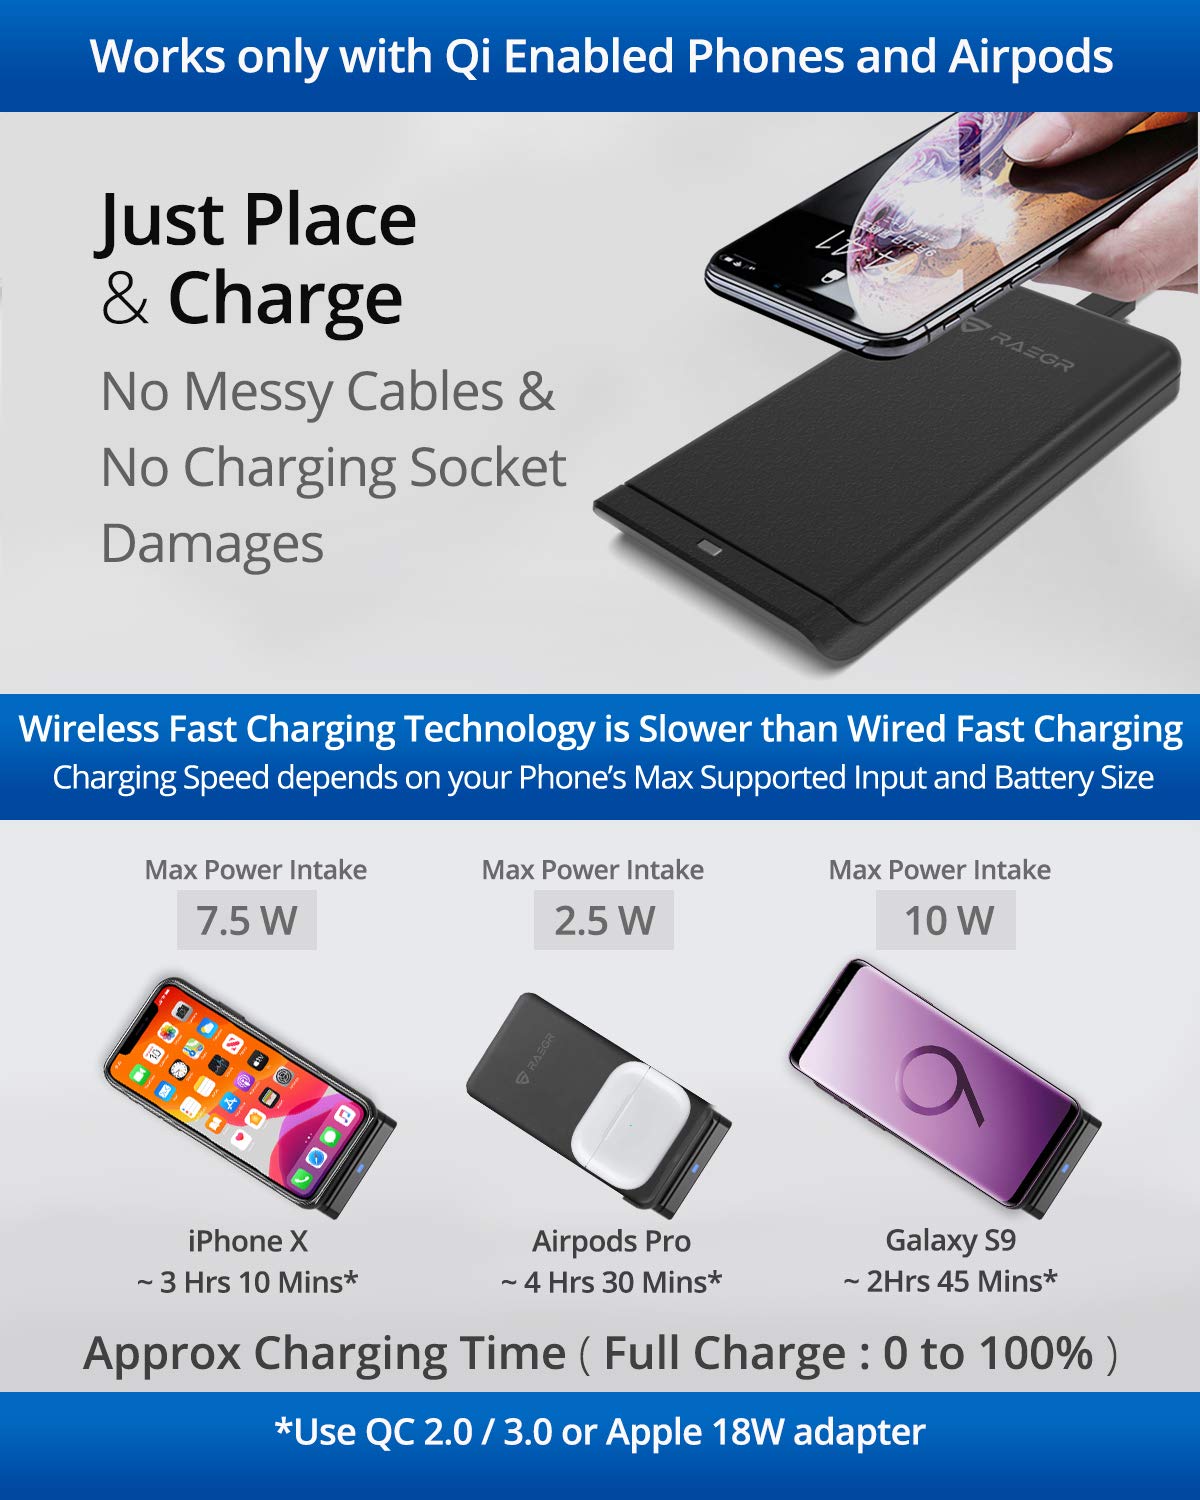 RAEGR Arc 1100 [2-in-1] Wireless Charging Stand